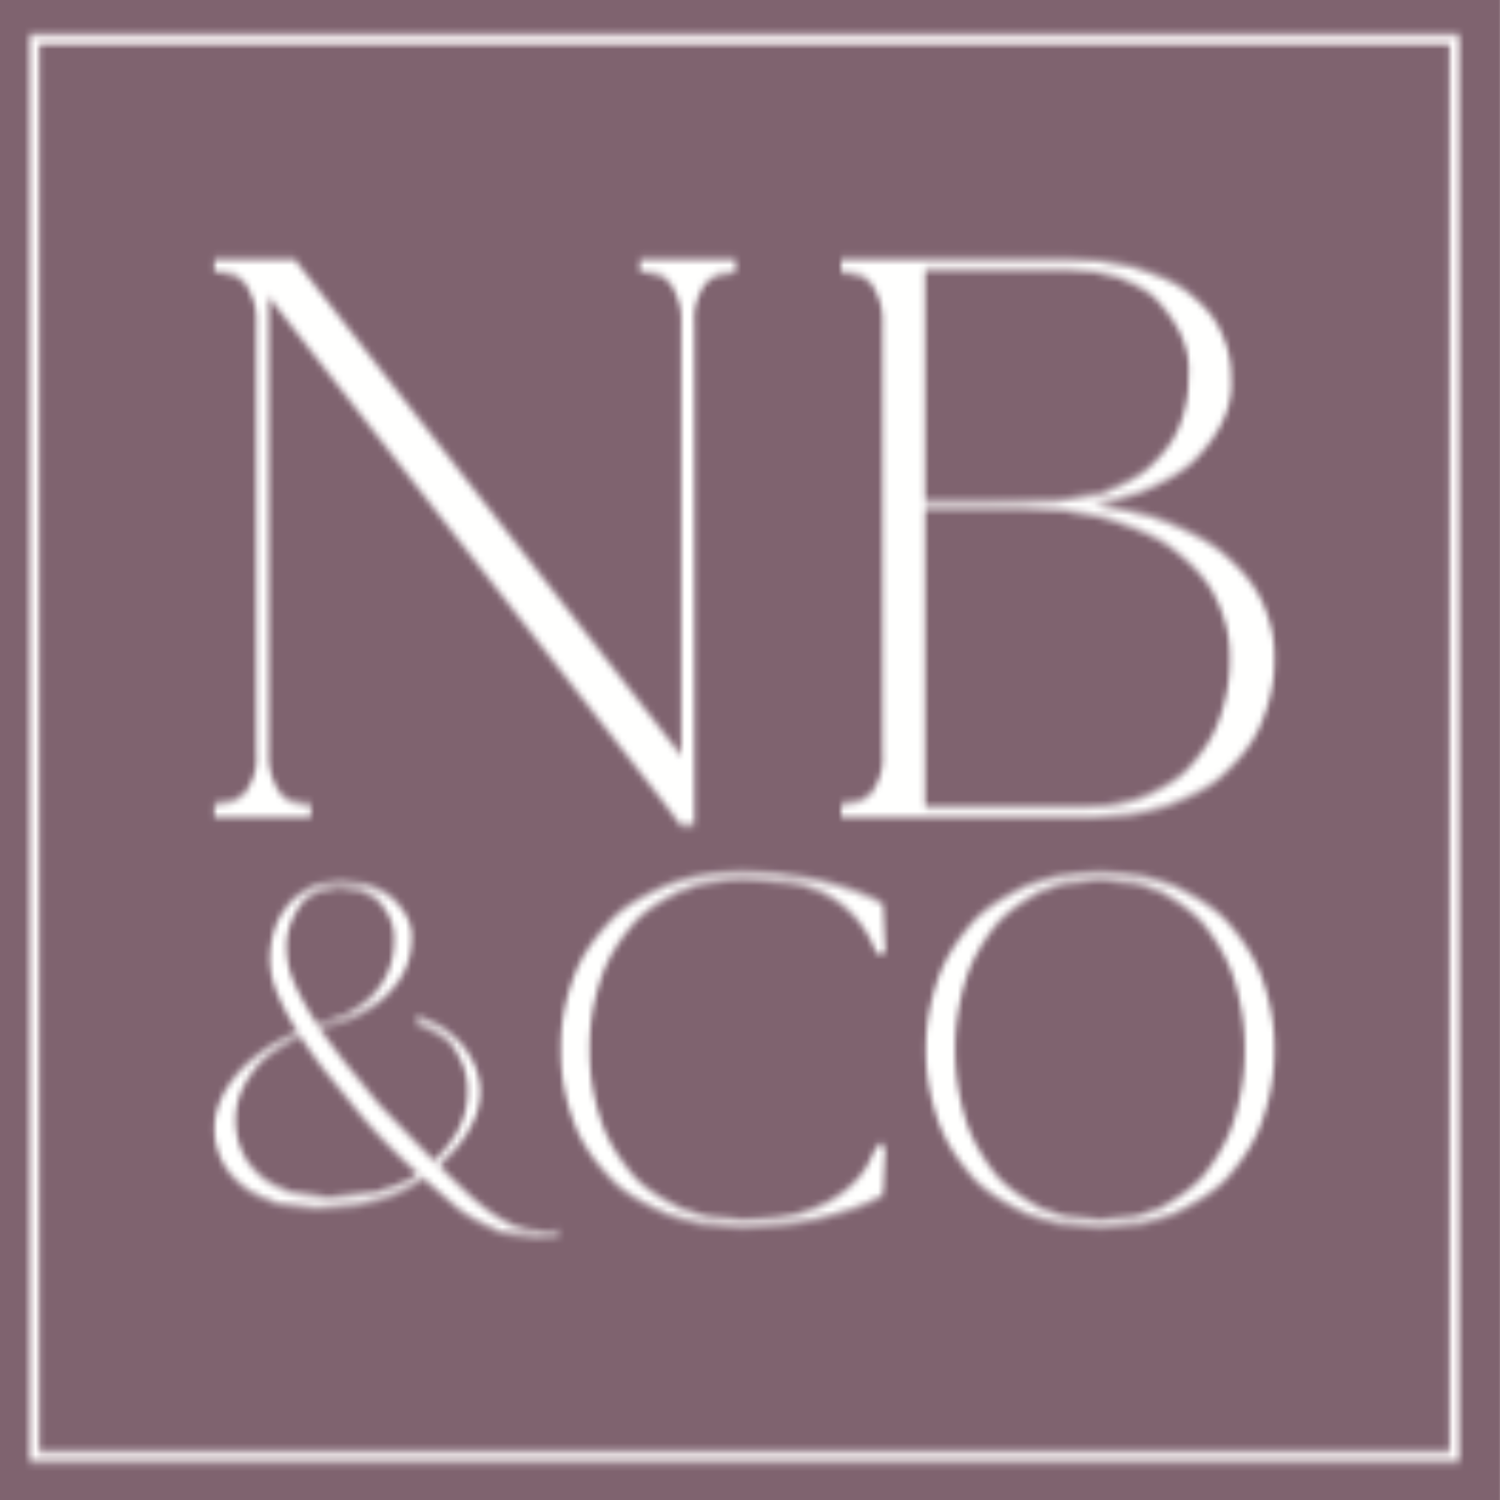 Natalie Bridal and Co.